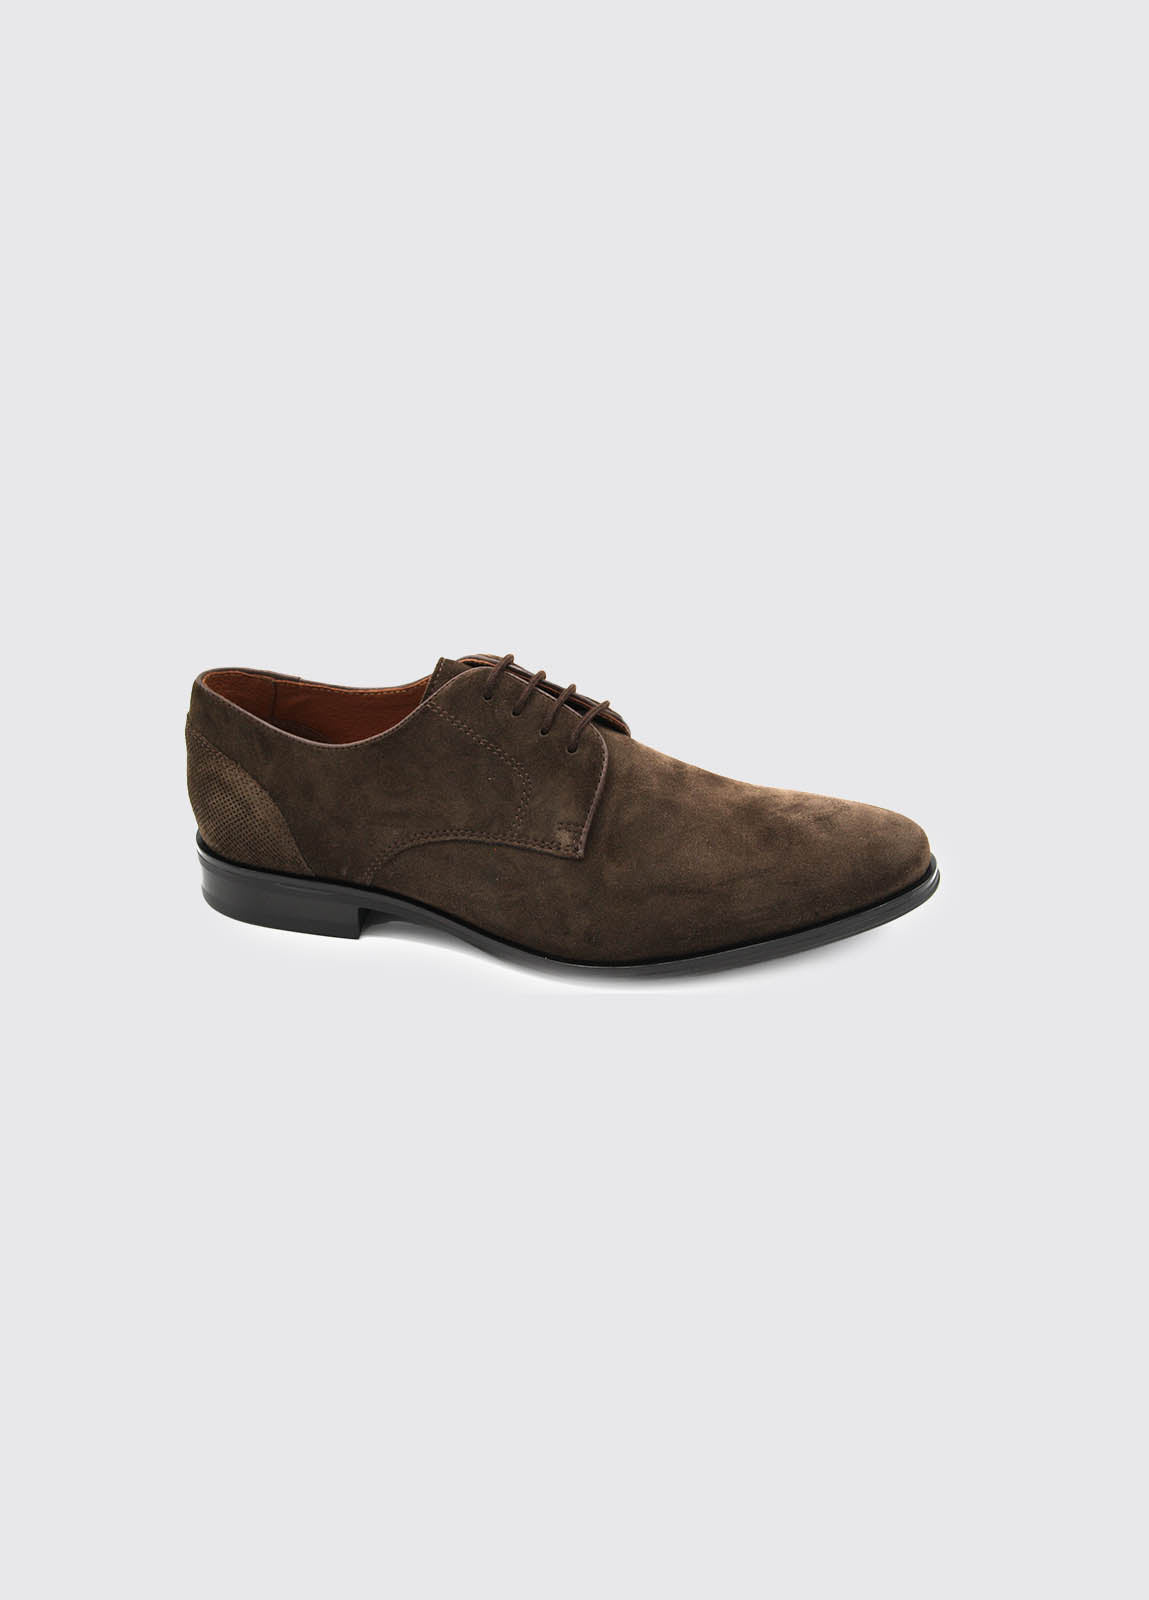 Sarge Walnut Suede Shoe-Side view